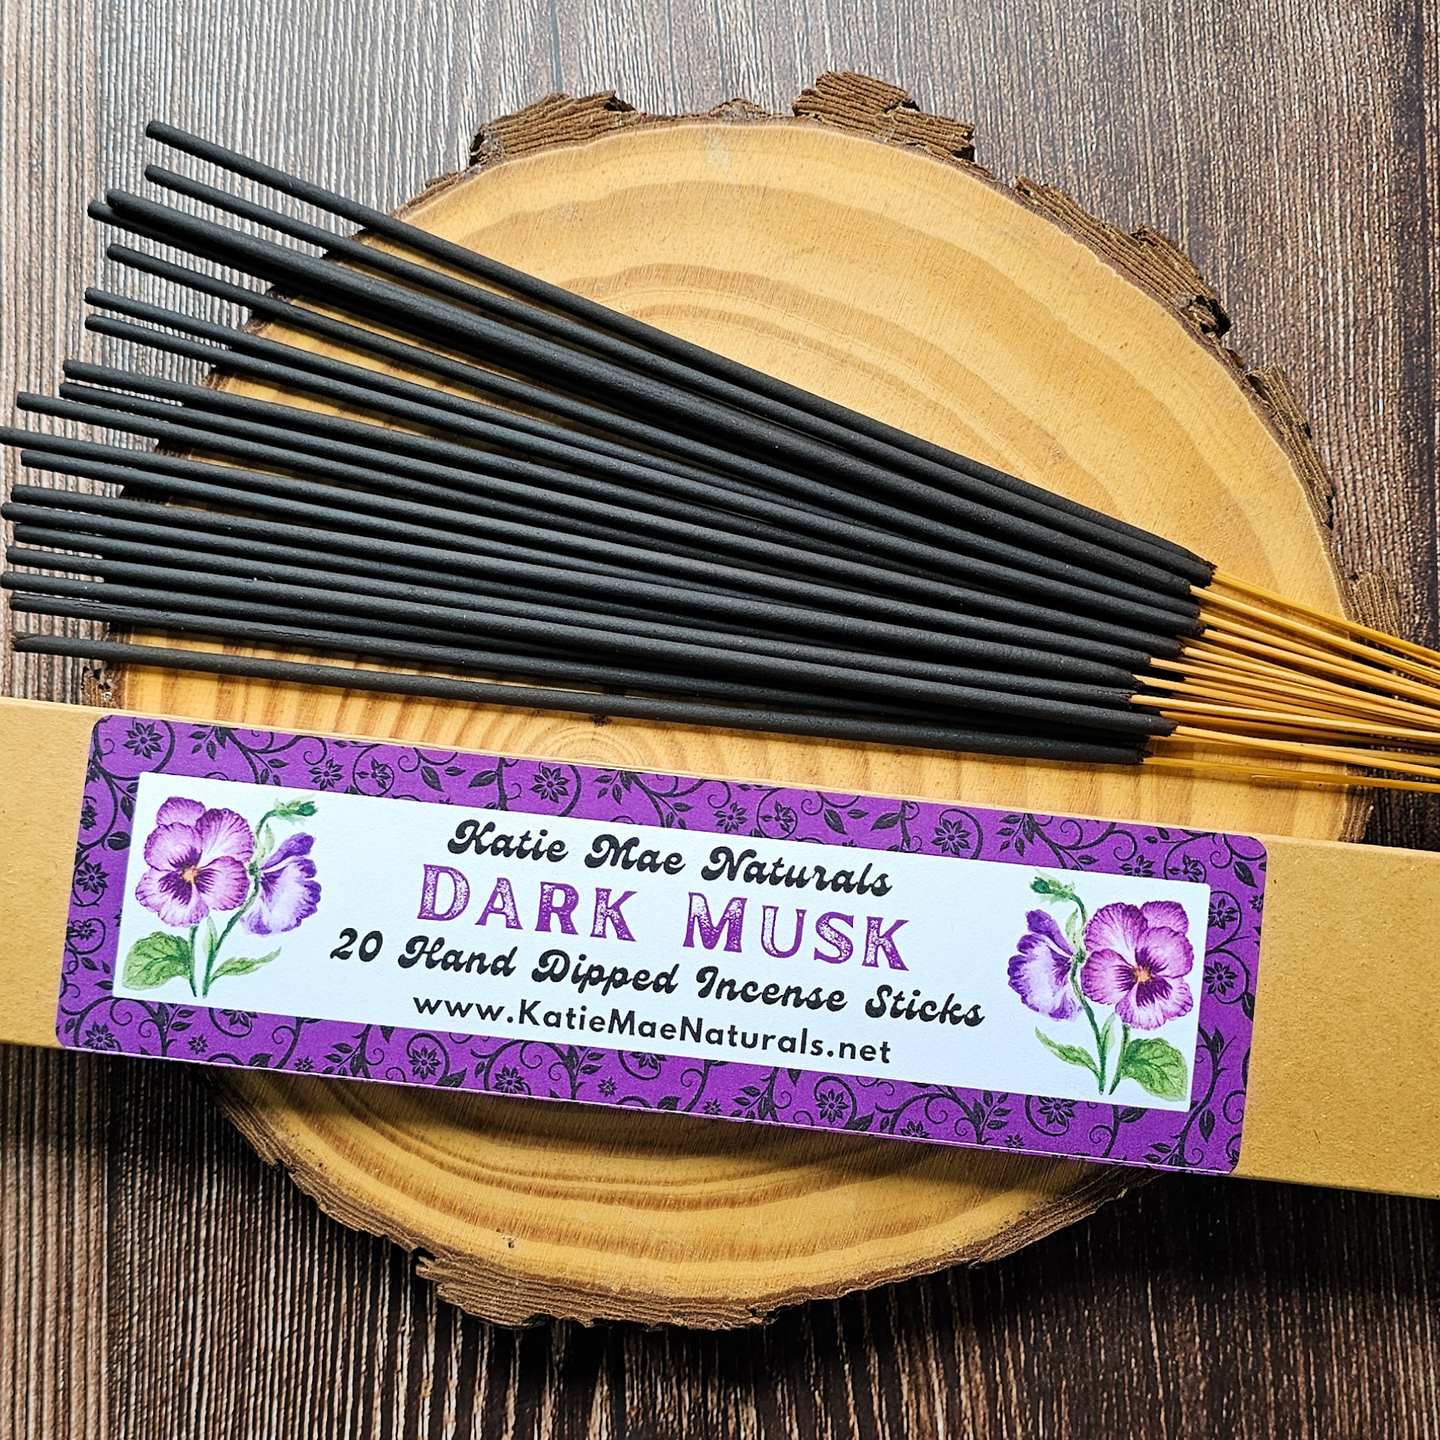 Musk Hand Dipped Incense Sticks 